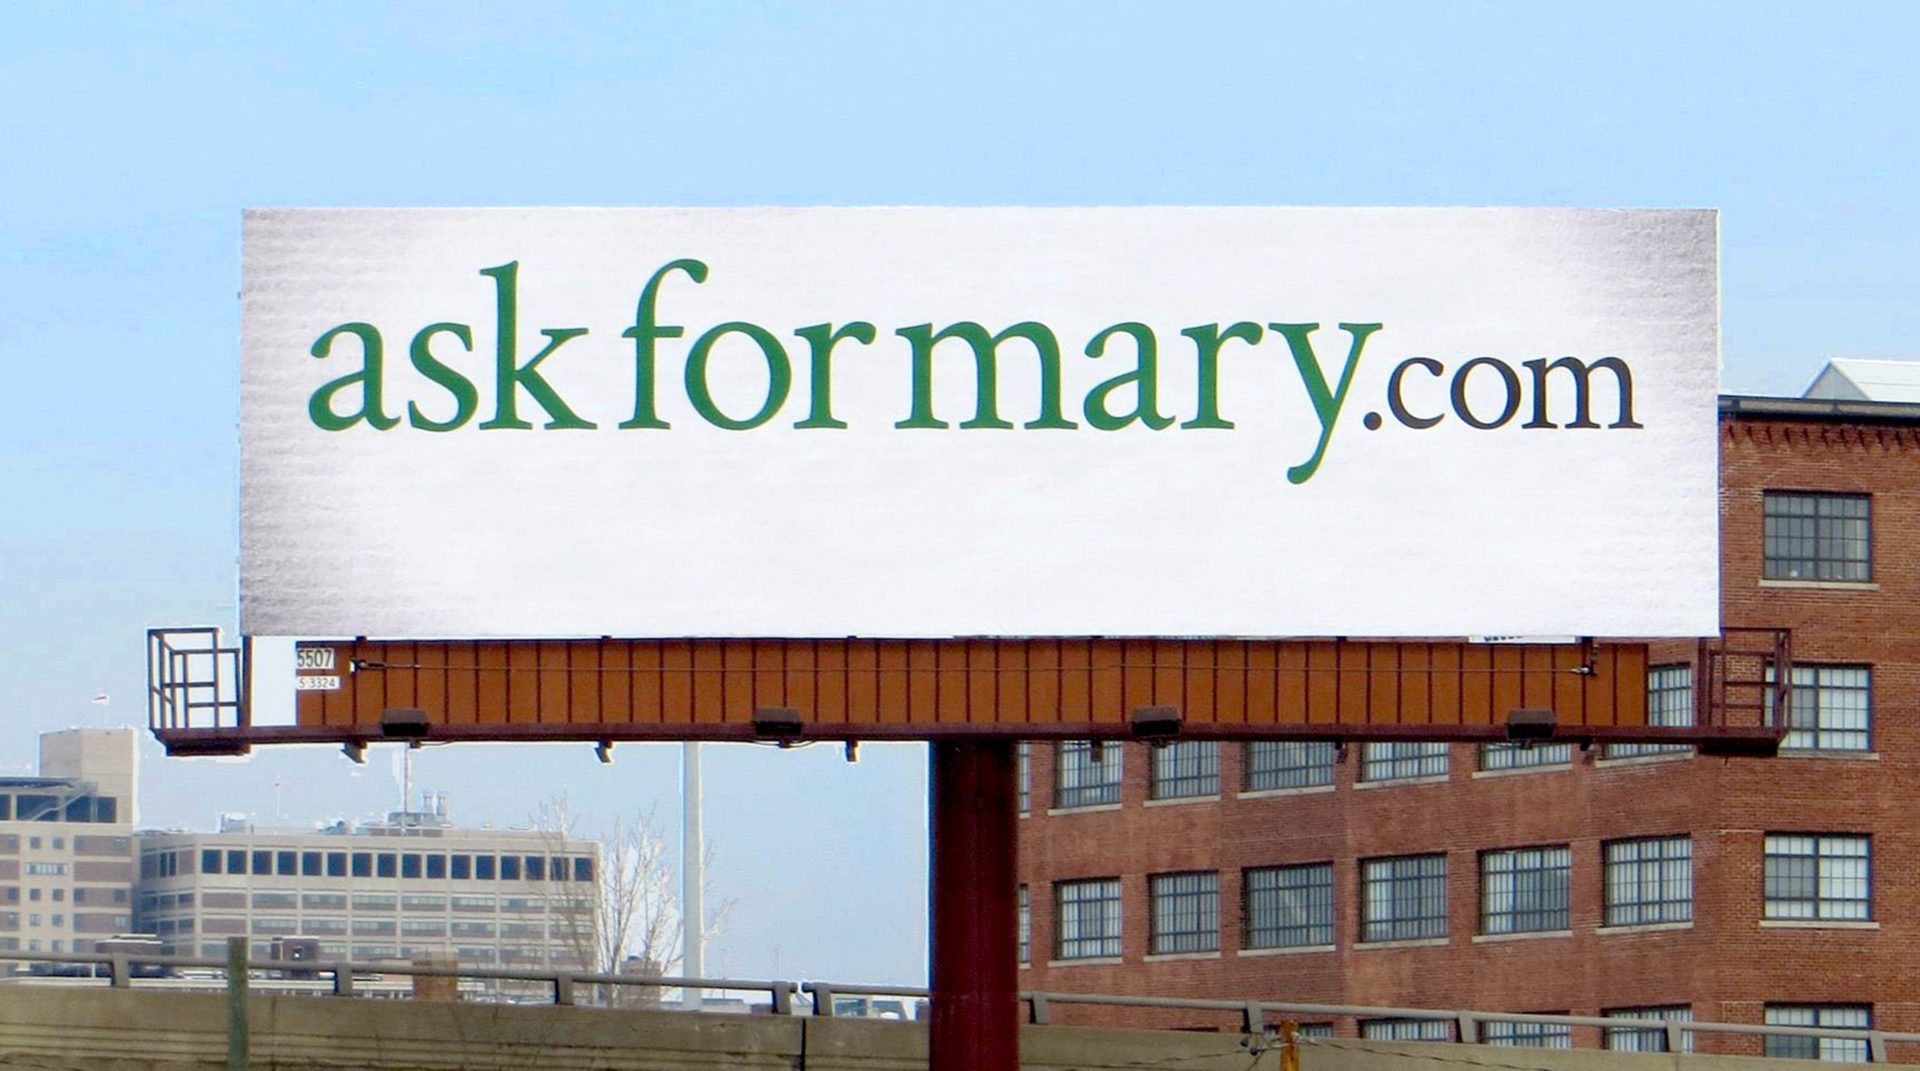 Ask for mary.com tease out of home bulletin